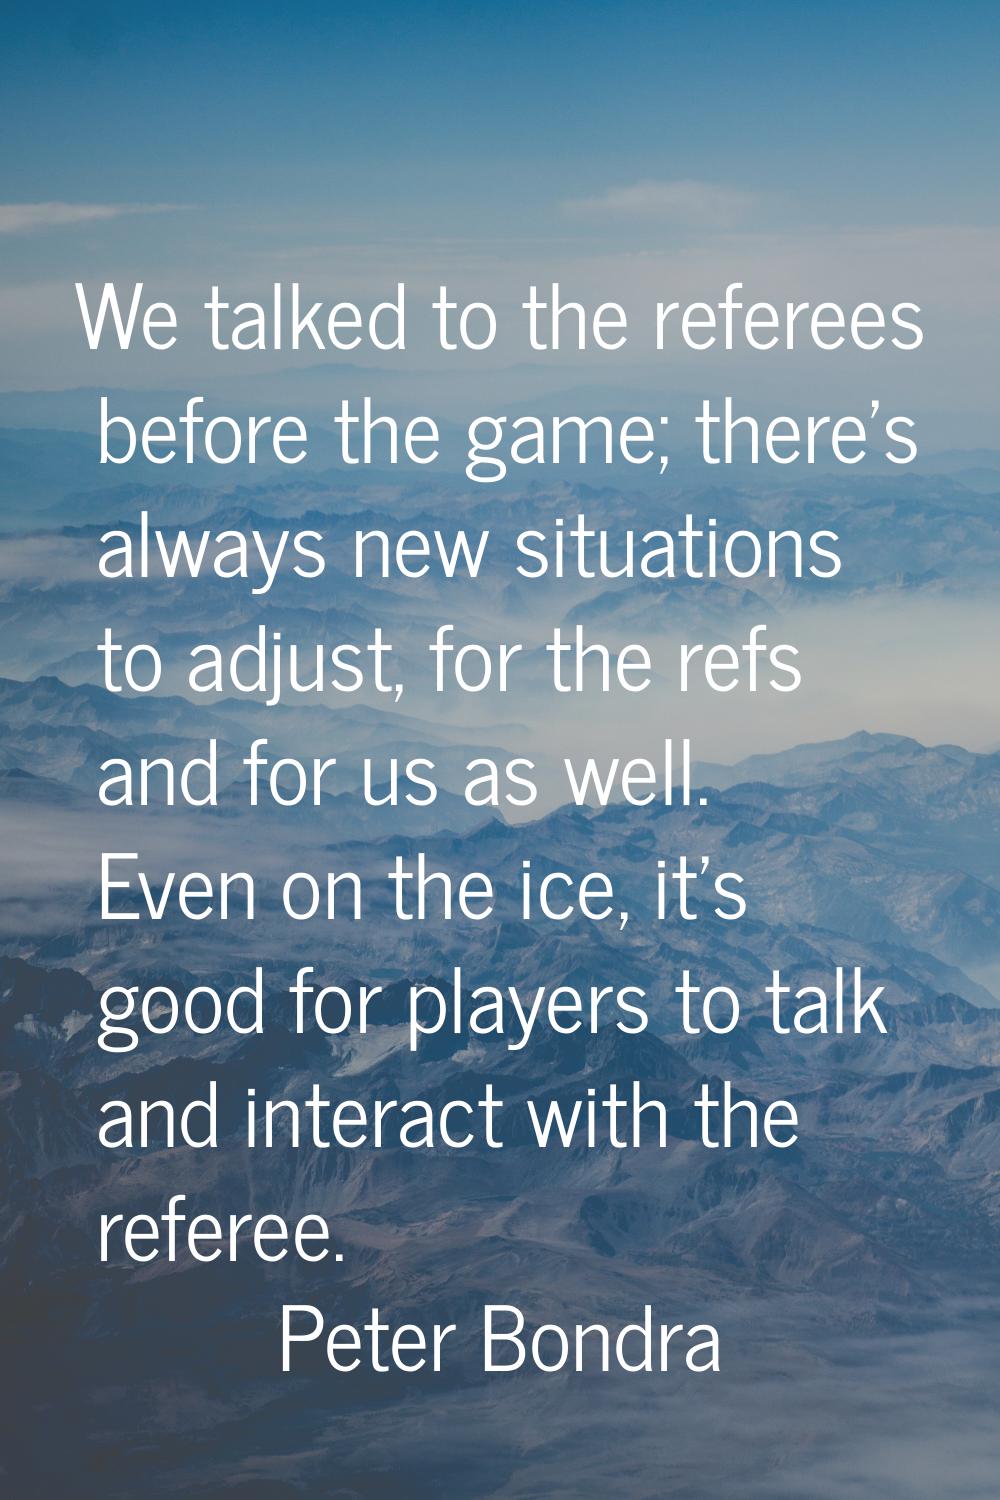 We talked to the referees before the game; there's always new situations to adjust, for the refs an